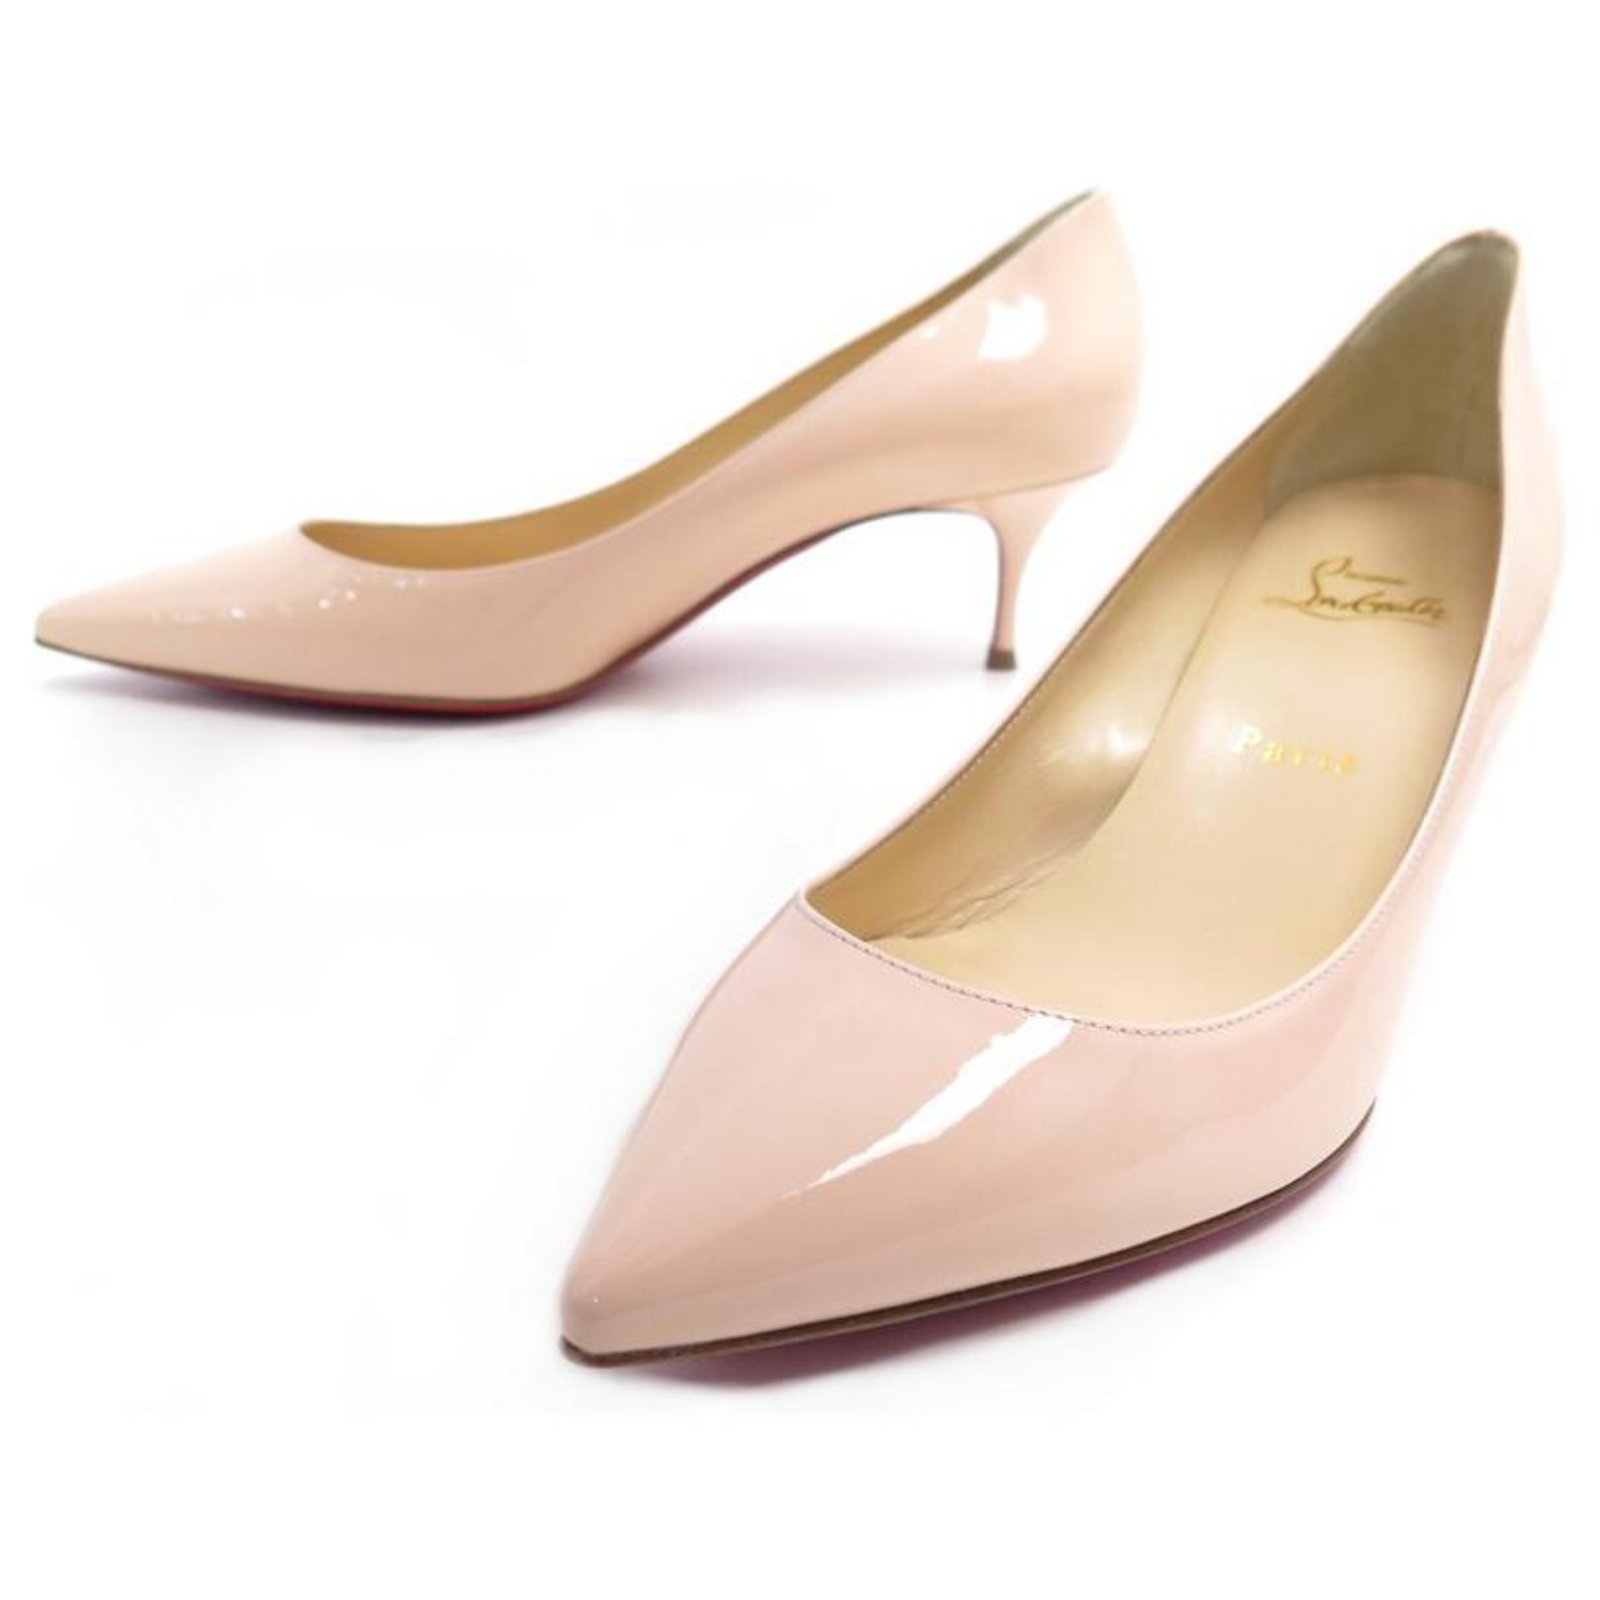 Christian Louboutin Pigalle Follies Pointed Toe Pump in Nude